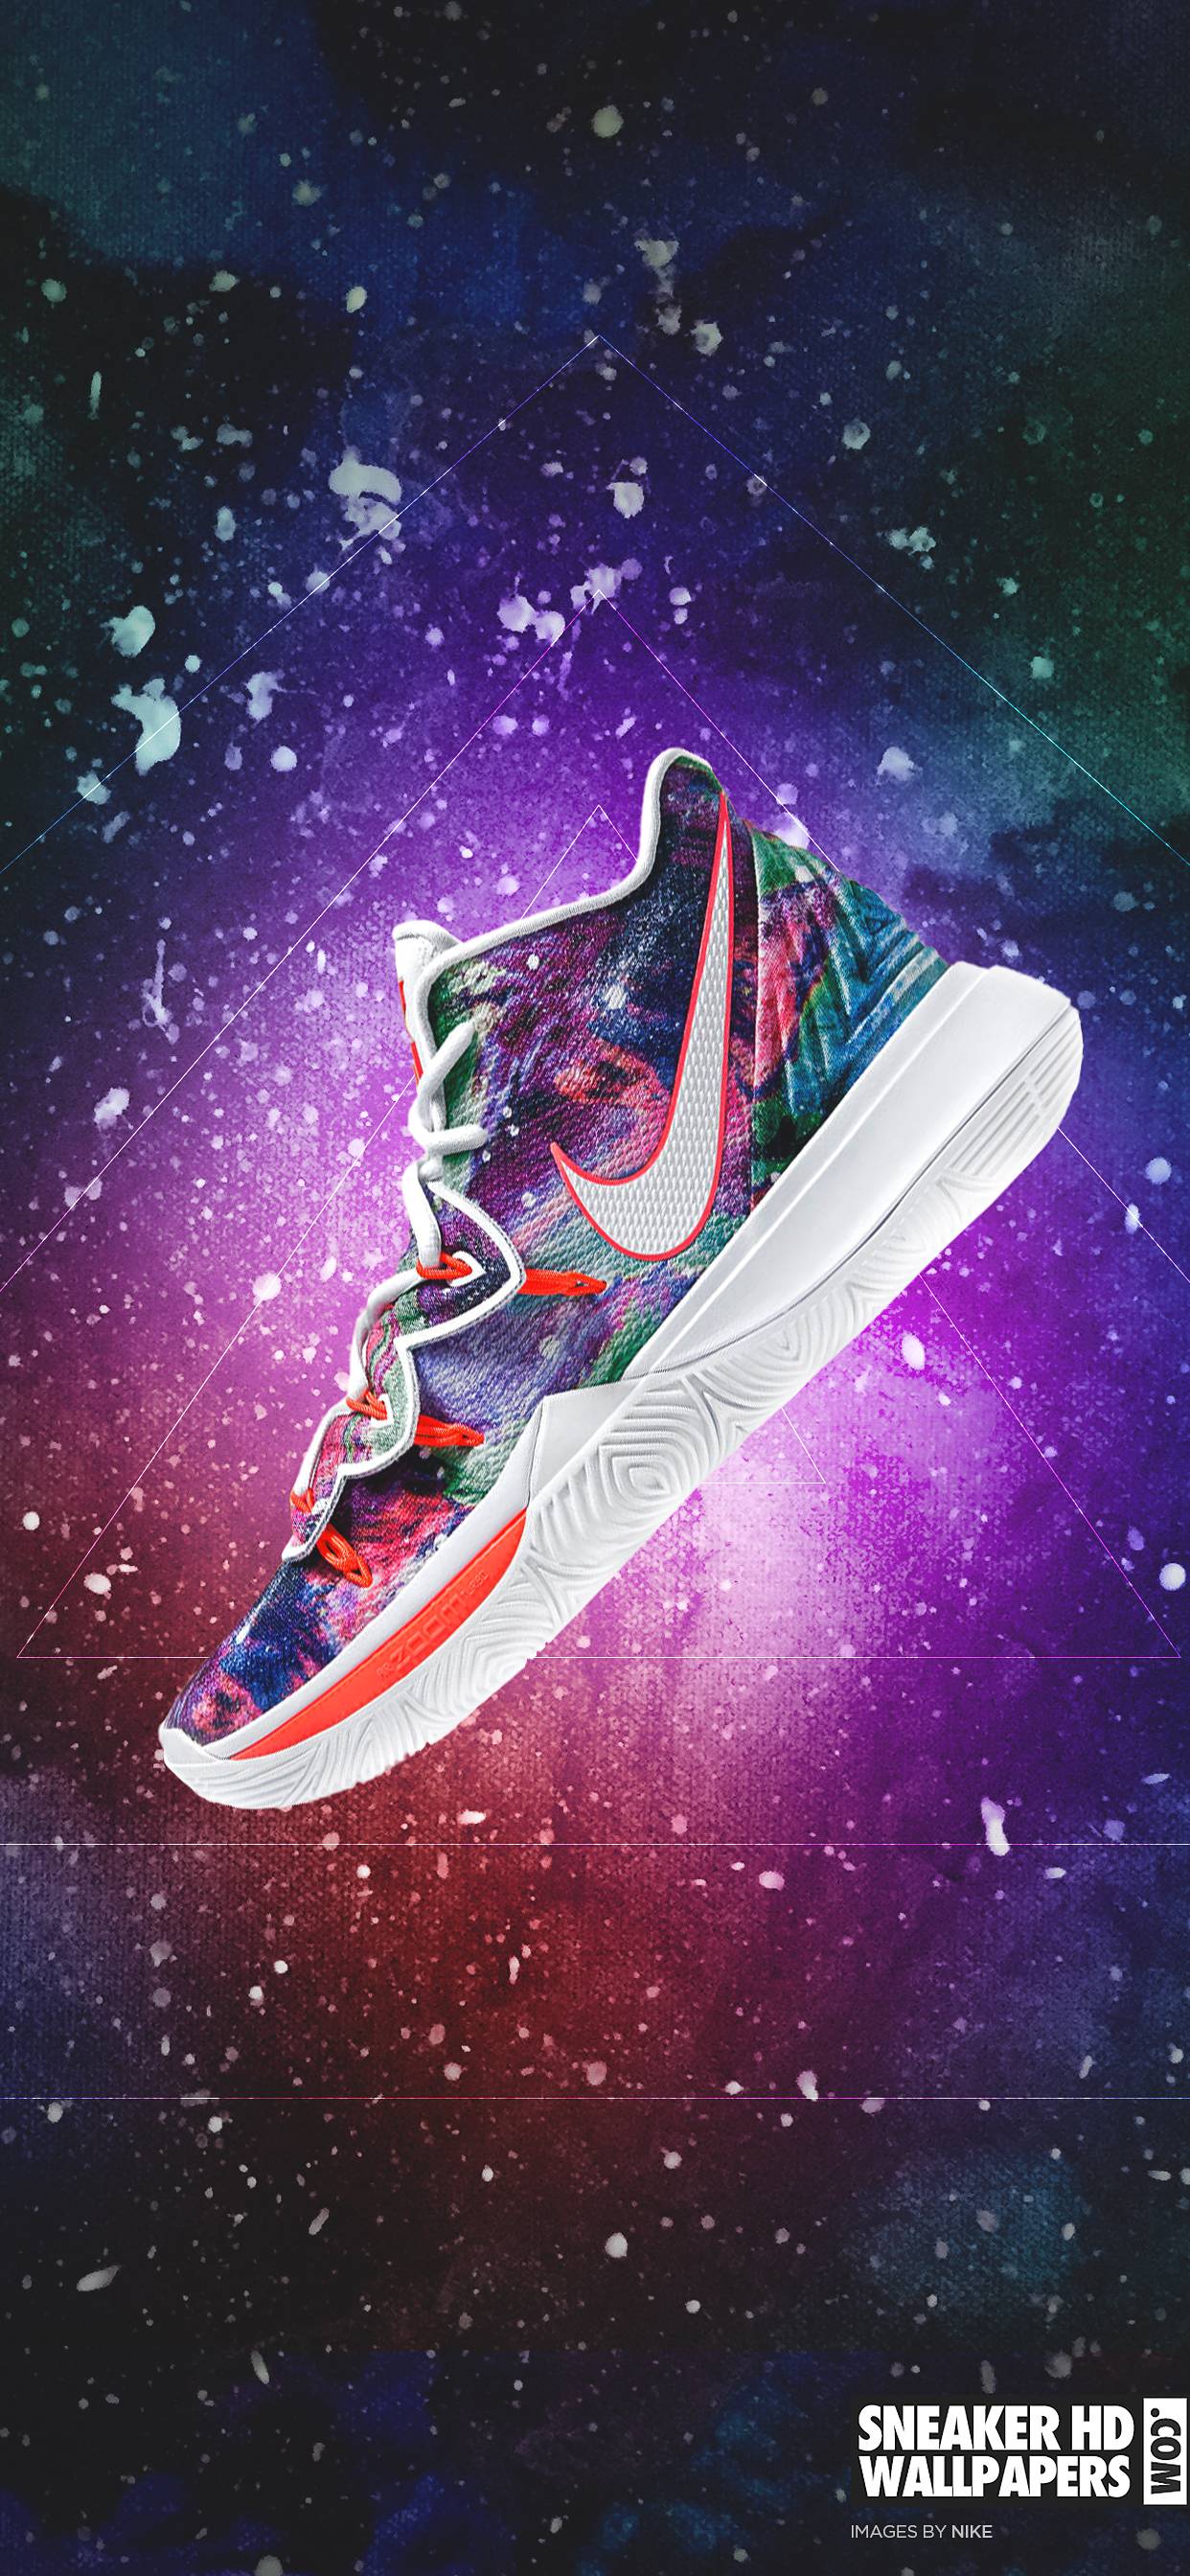 Nike Wallpaper Galaxy / Nike Galaxy Wallpapers Posted By